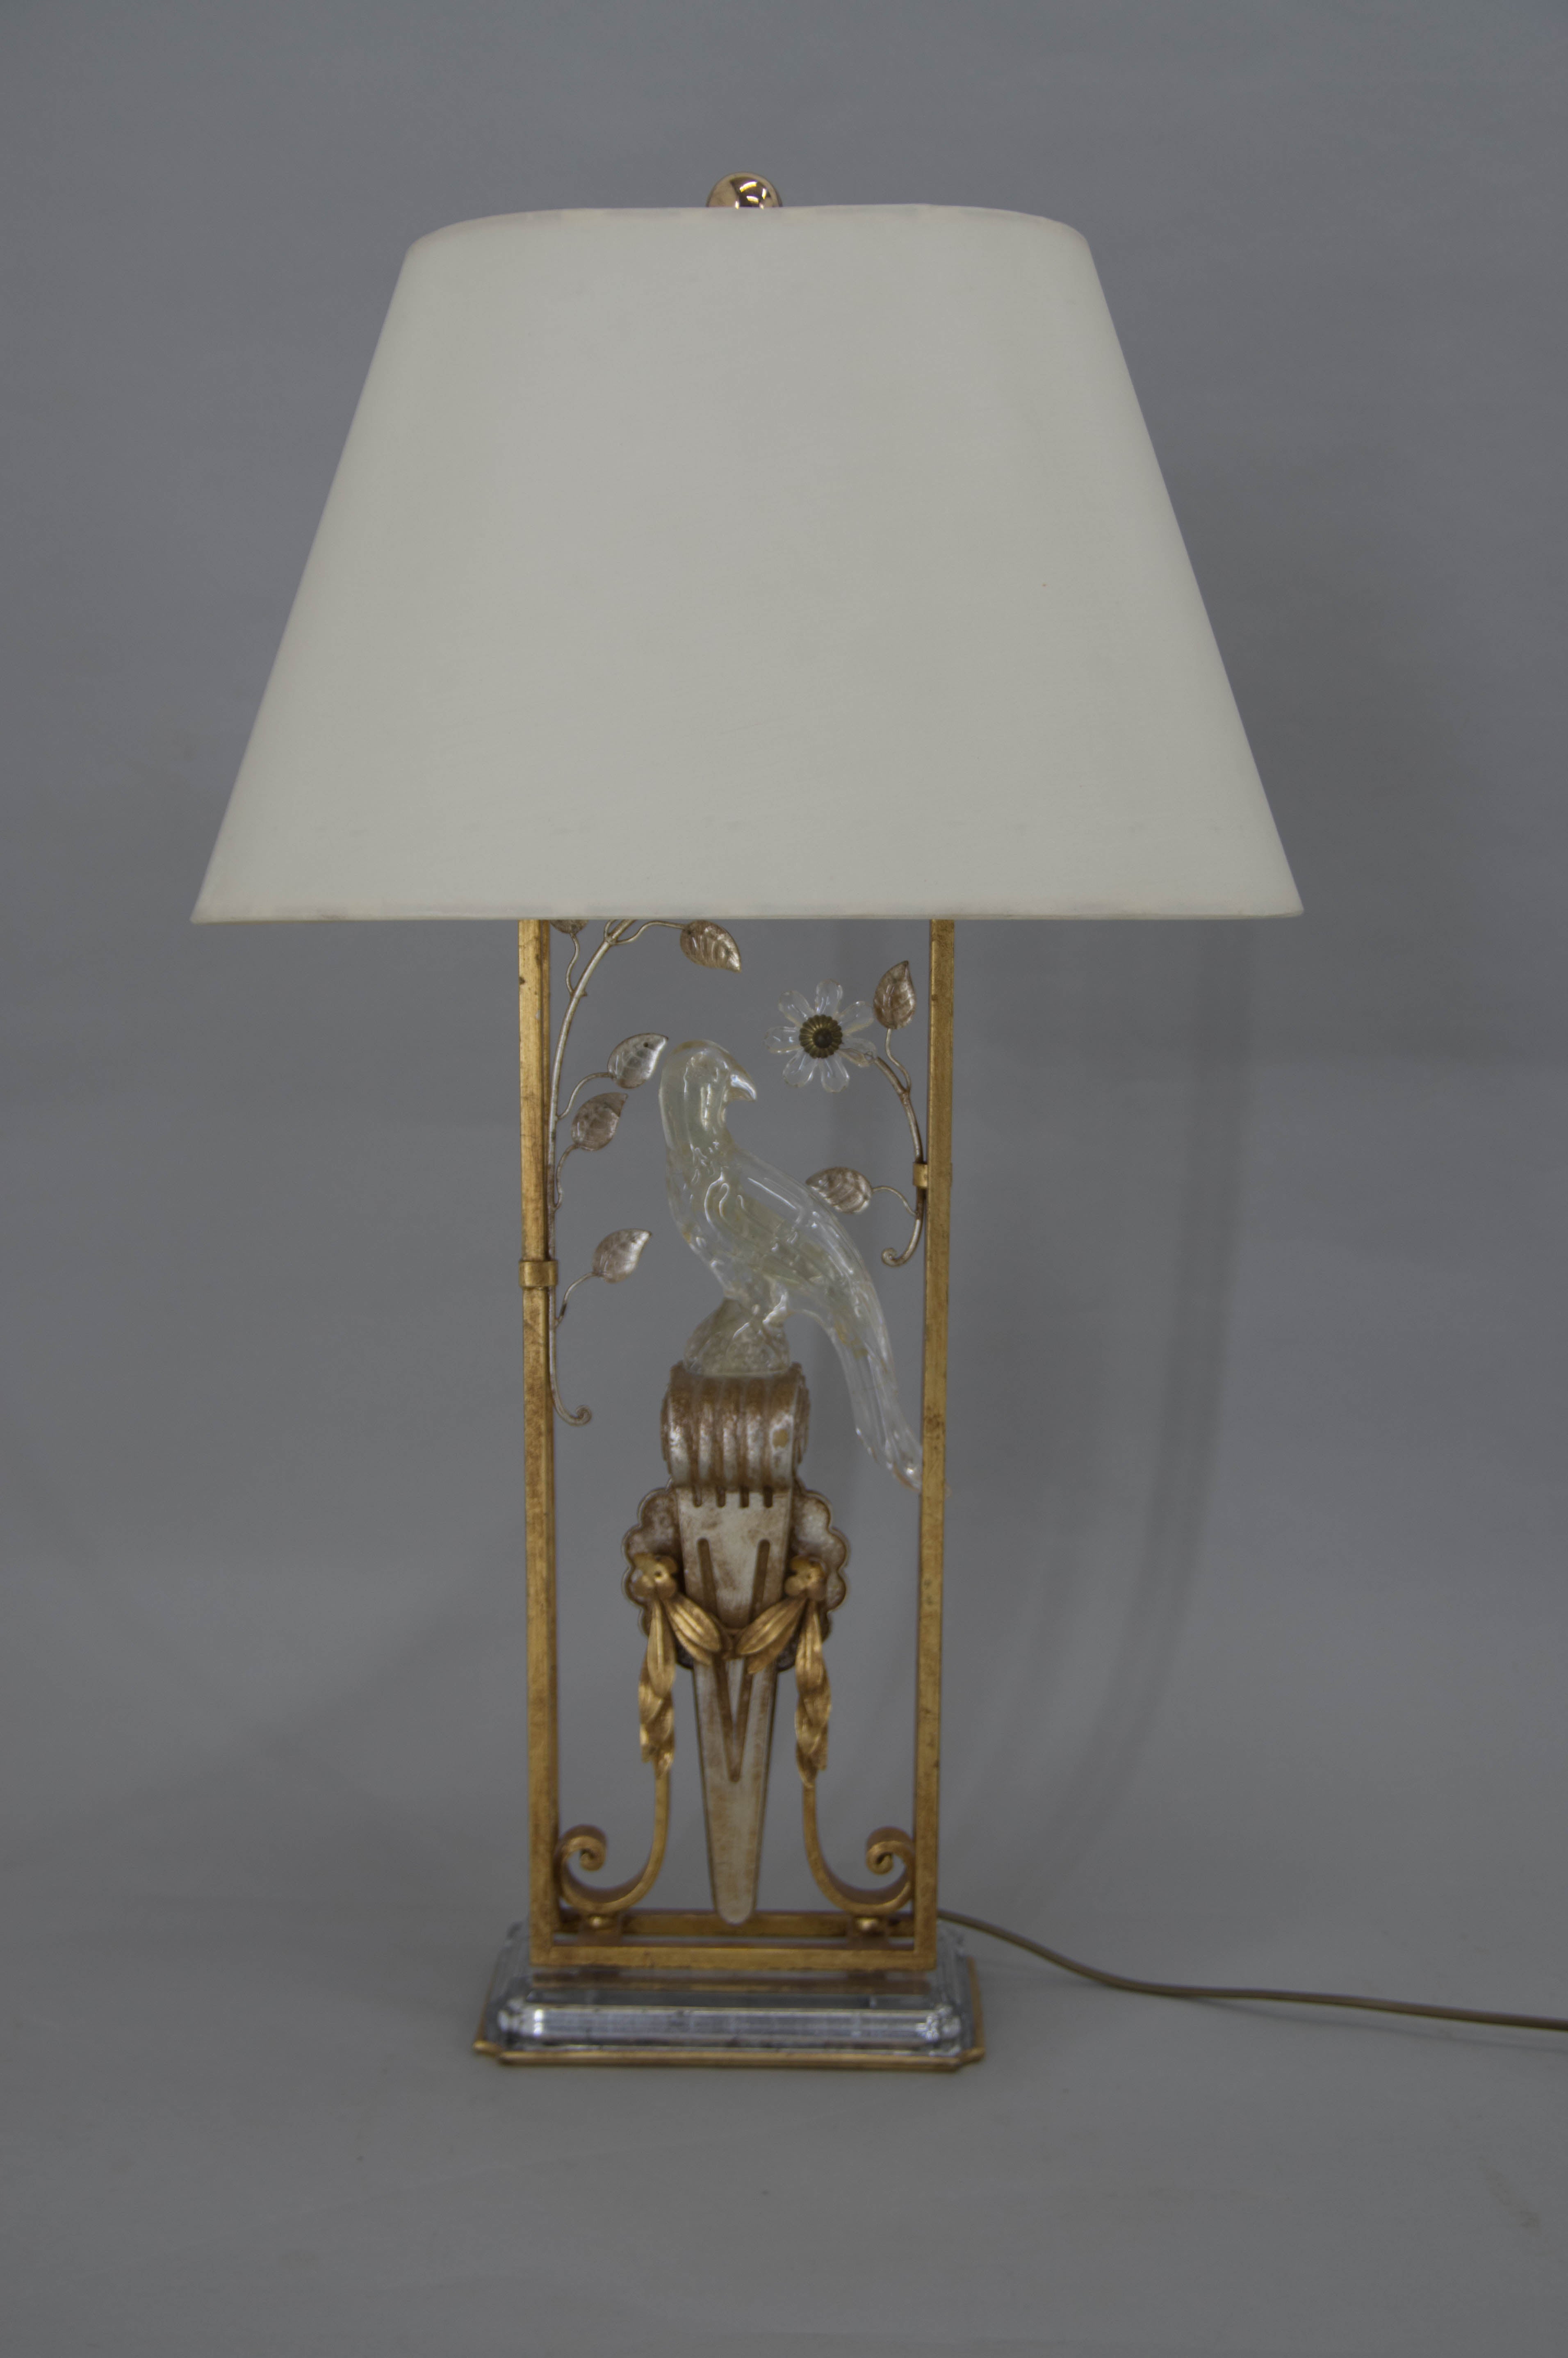 Beautiful big table lamp with crystal parrot and leaves with fabric shade.
Attributed to Maison Begués.
Original condition. 
The shade has traces of liquid on one side, the other side is perfect.
One crystal leaf has broken top visible on